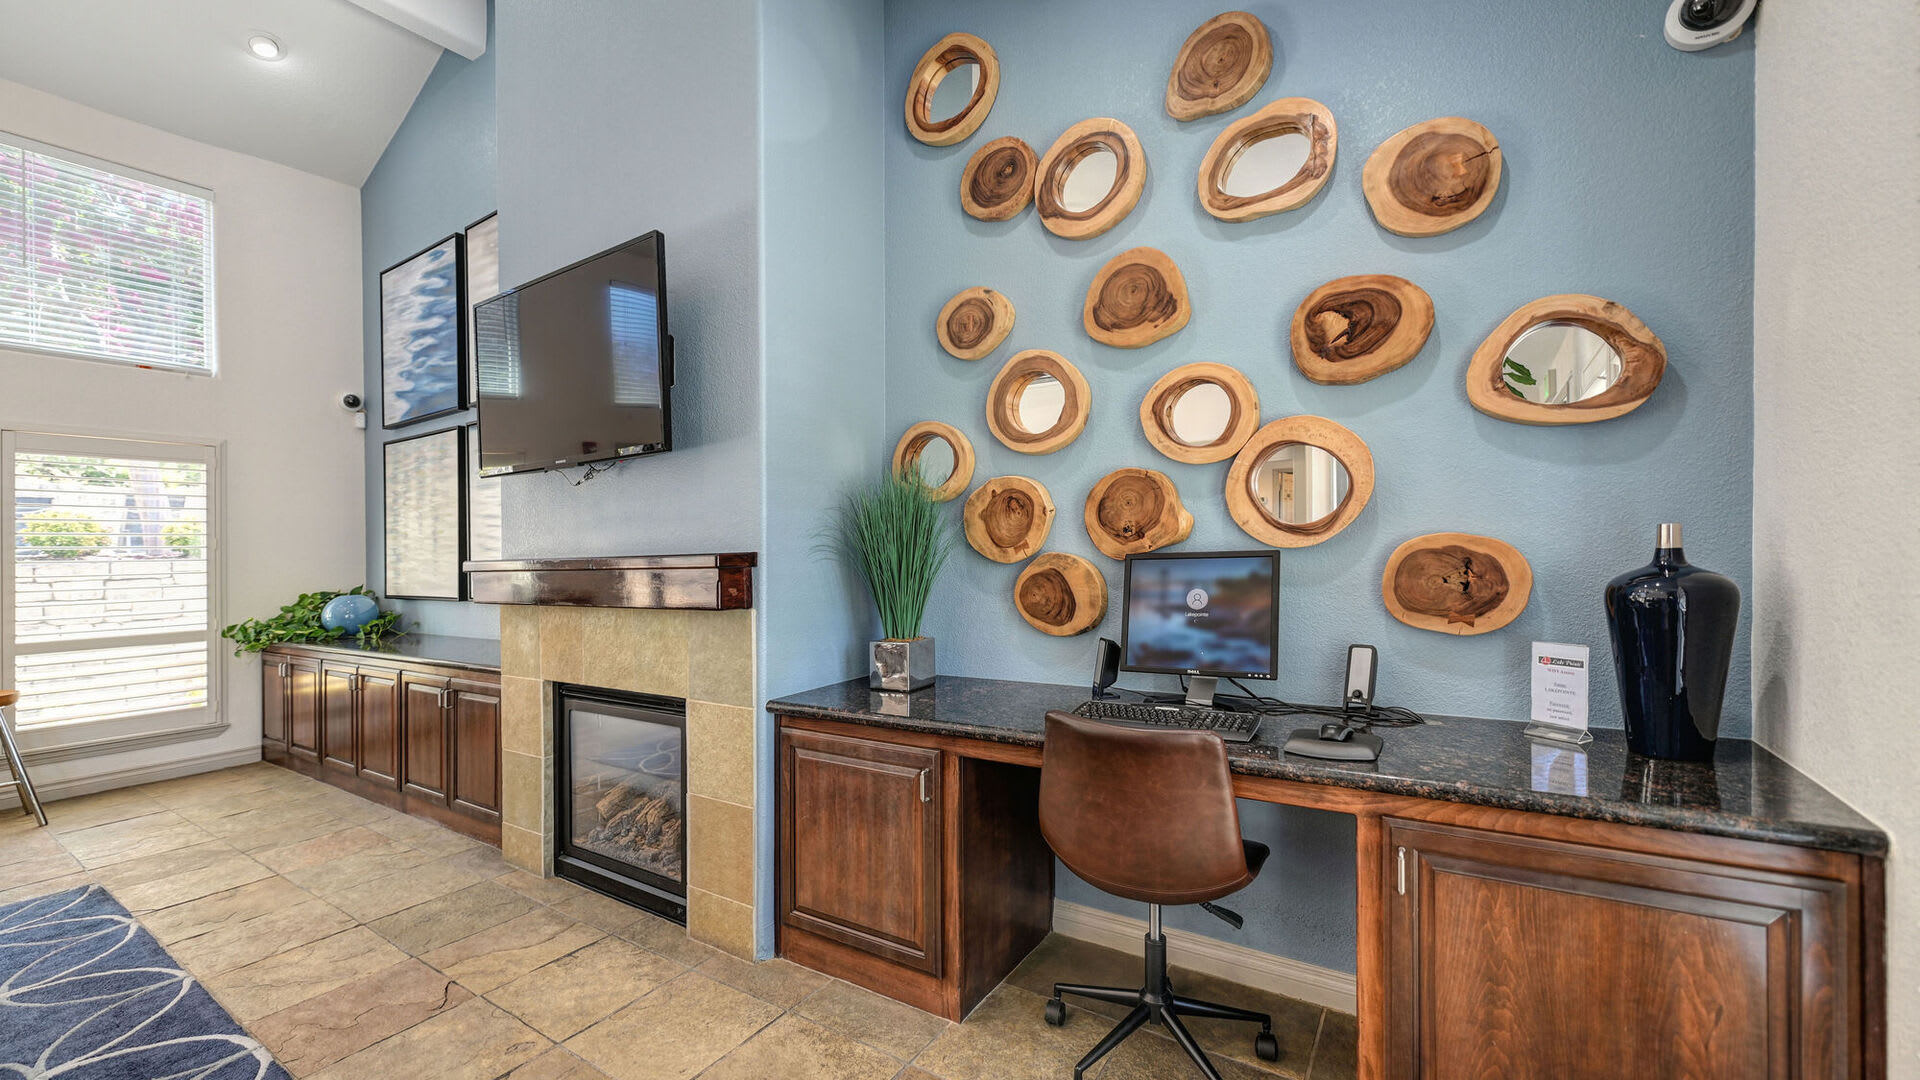 Clubhouse decor at Lake Pointe Apartments in Folsom, California